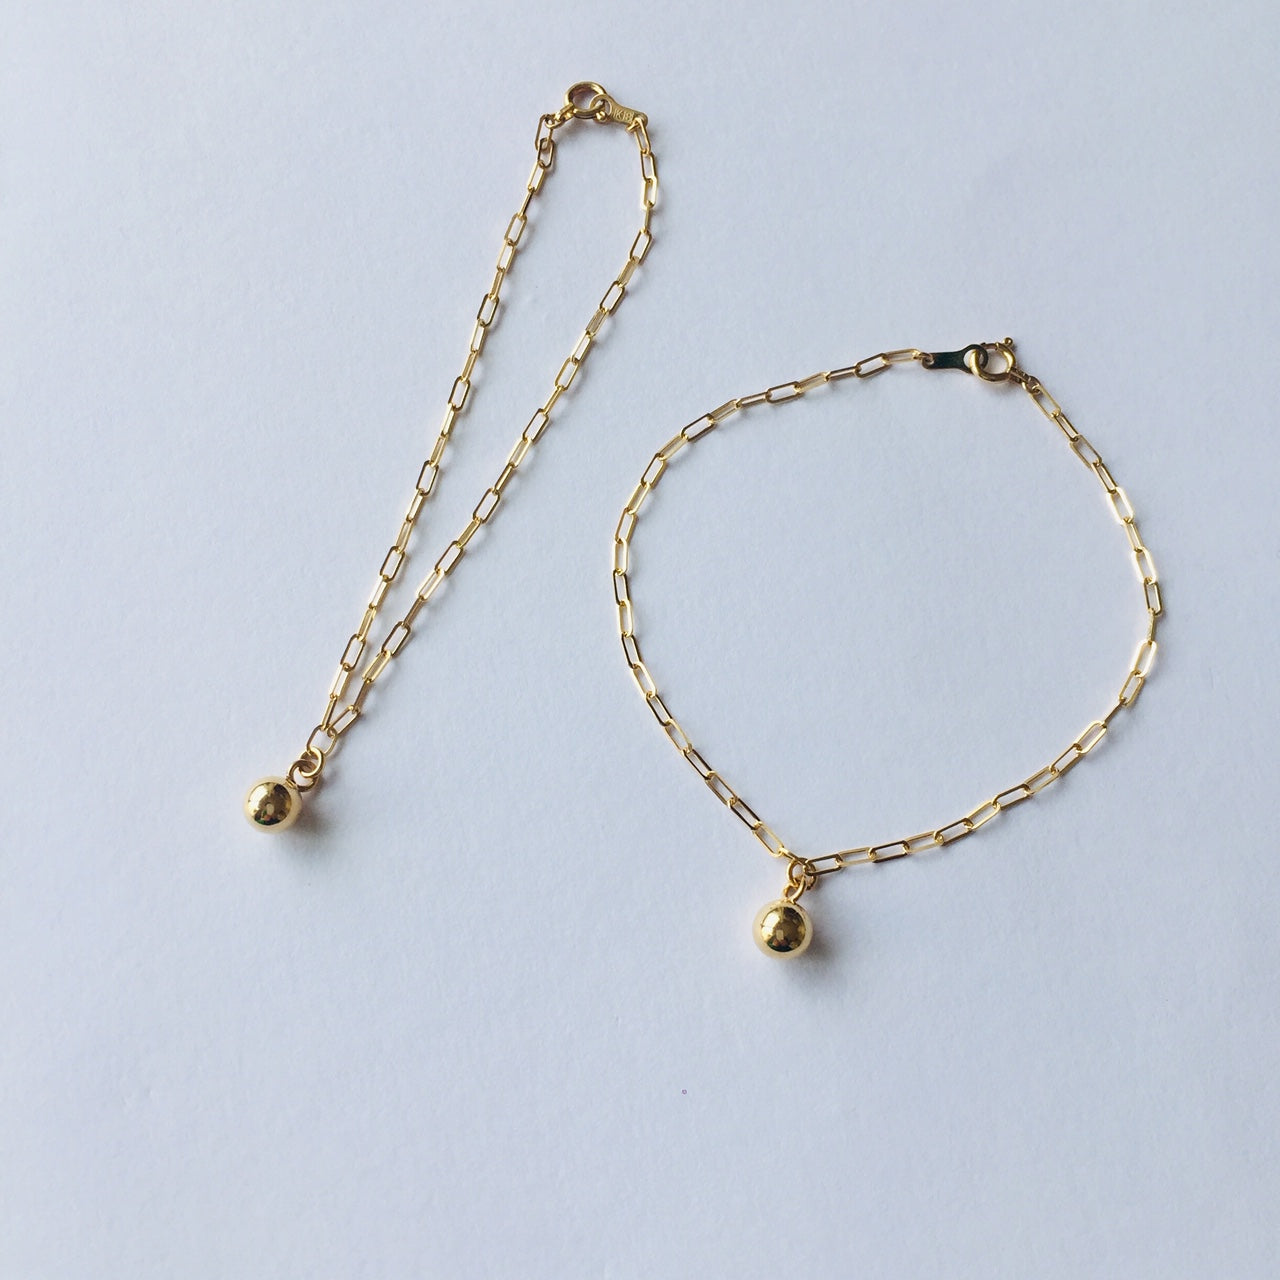 18K Gold Box Chain Bracelet with Gold Ball / Sphere Charm For Women  K18ゴールドボール・チャーム・ブレスレット